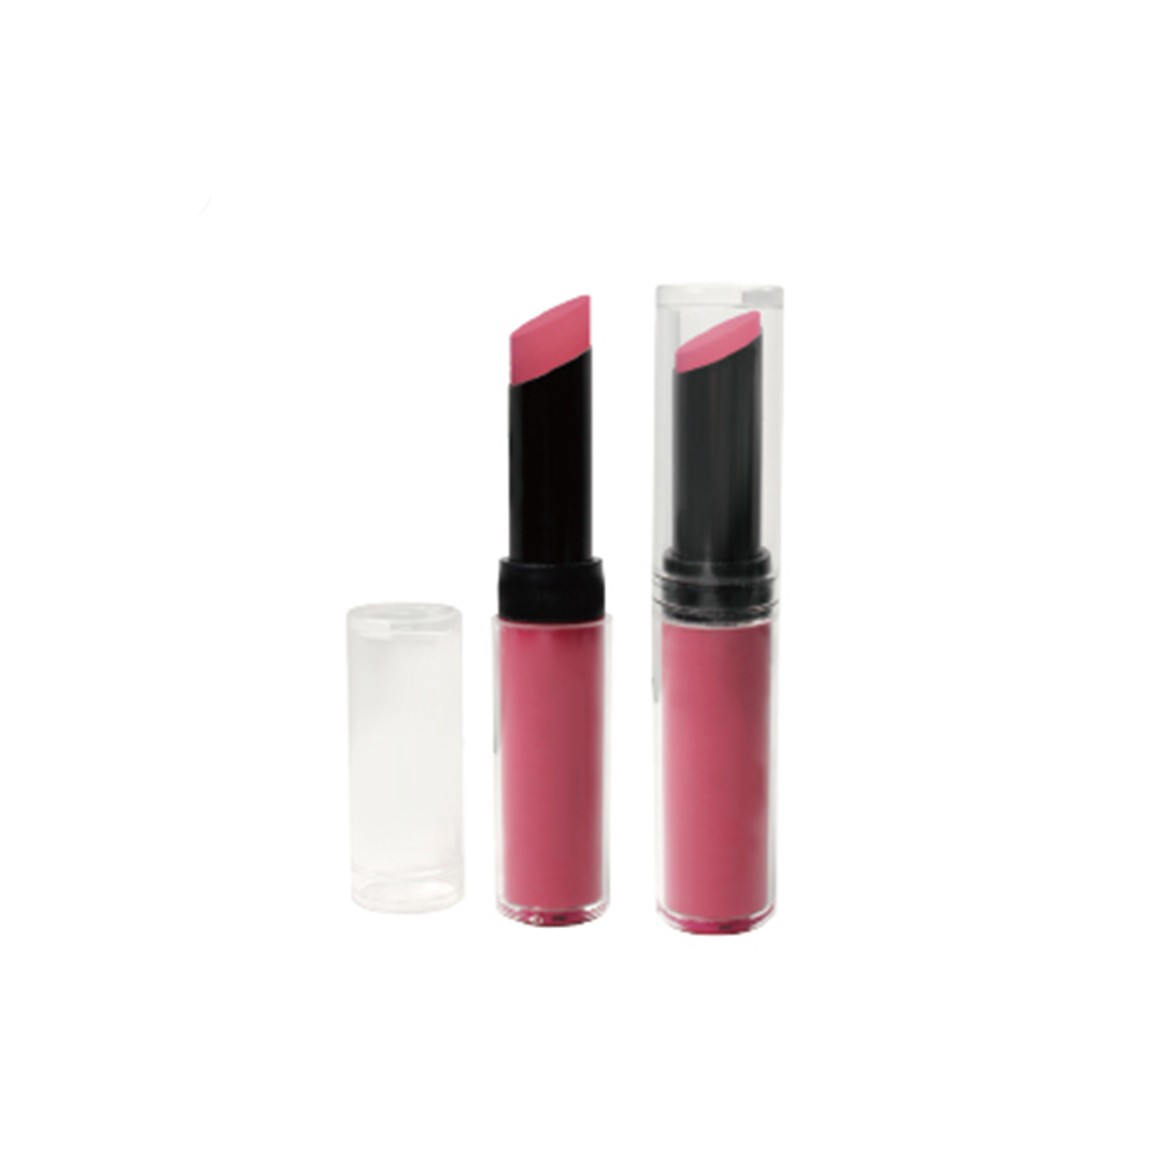 Glimmer Balm, Color-Changing customize Tinted pH Lip Balm Infused with Vitamin E for All-Day Moisture wholesale